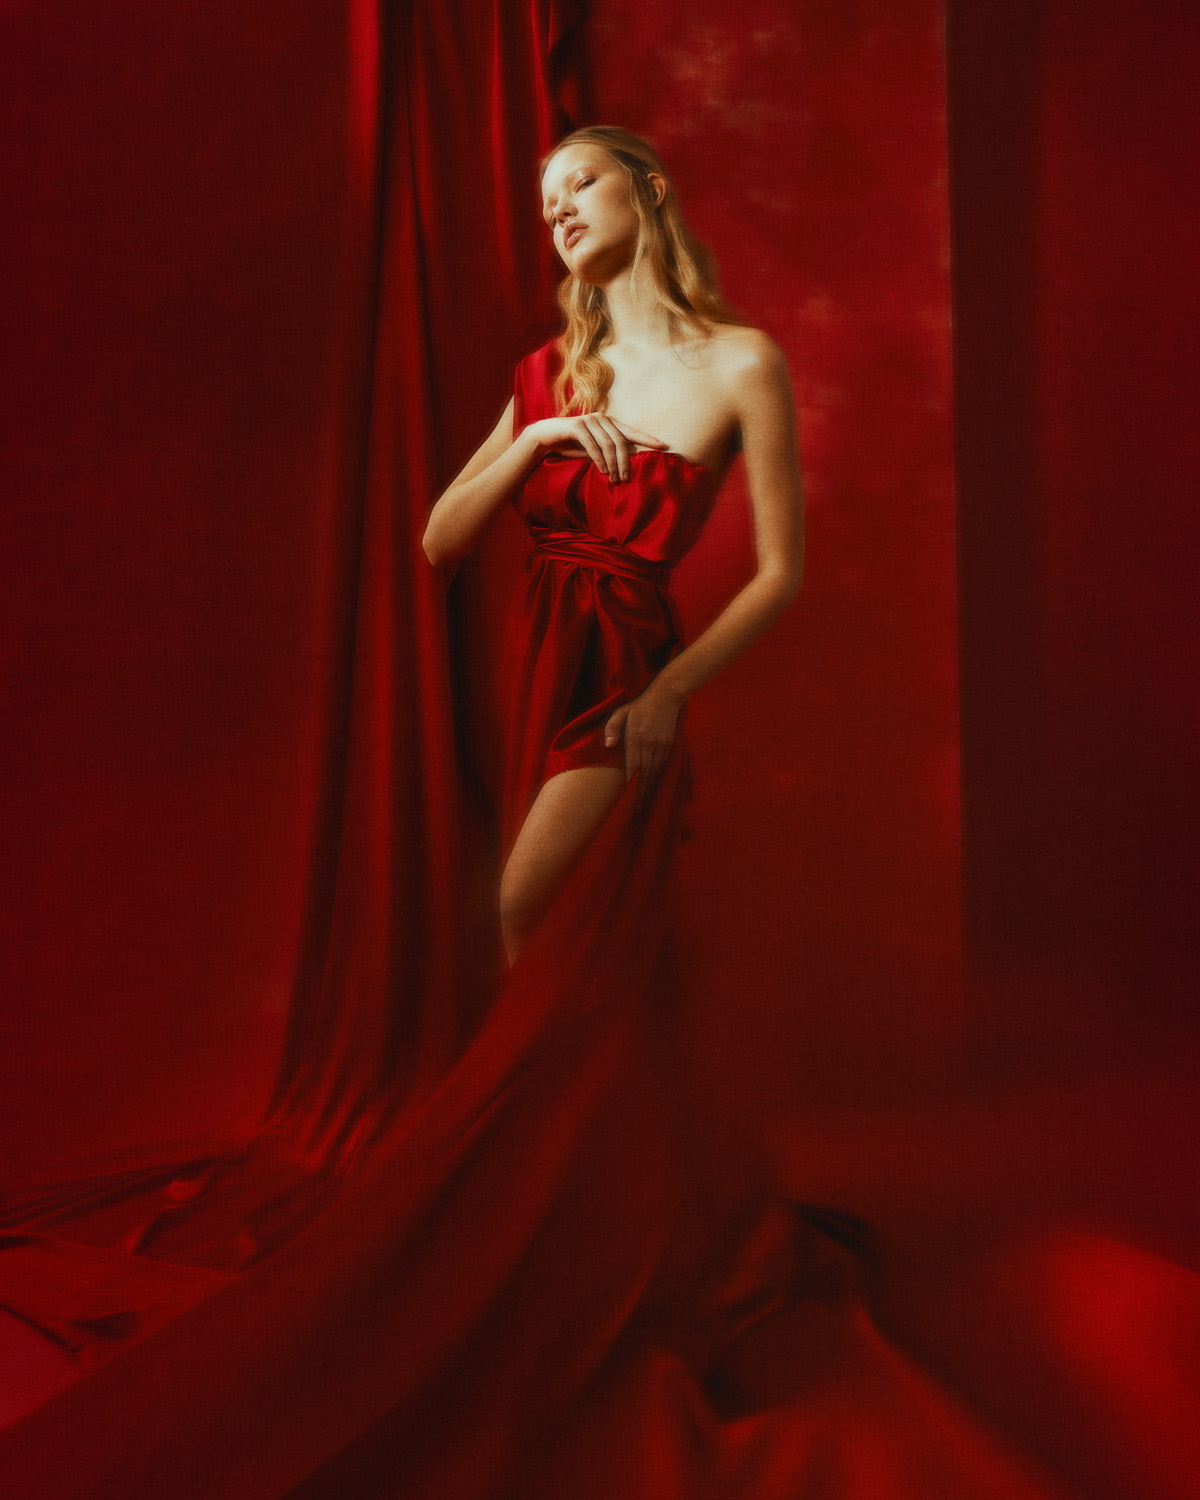 Photography Blond model wearring a Luxury red dress on red background